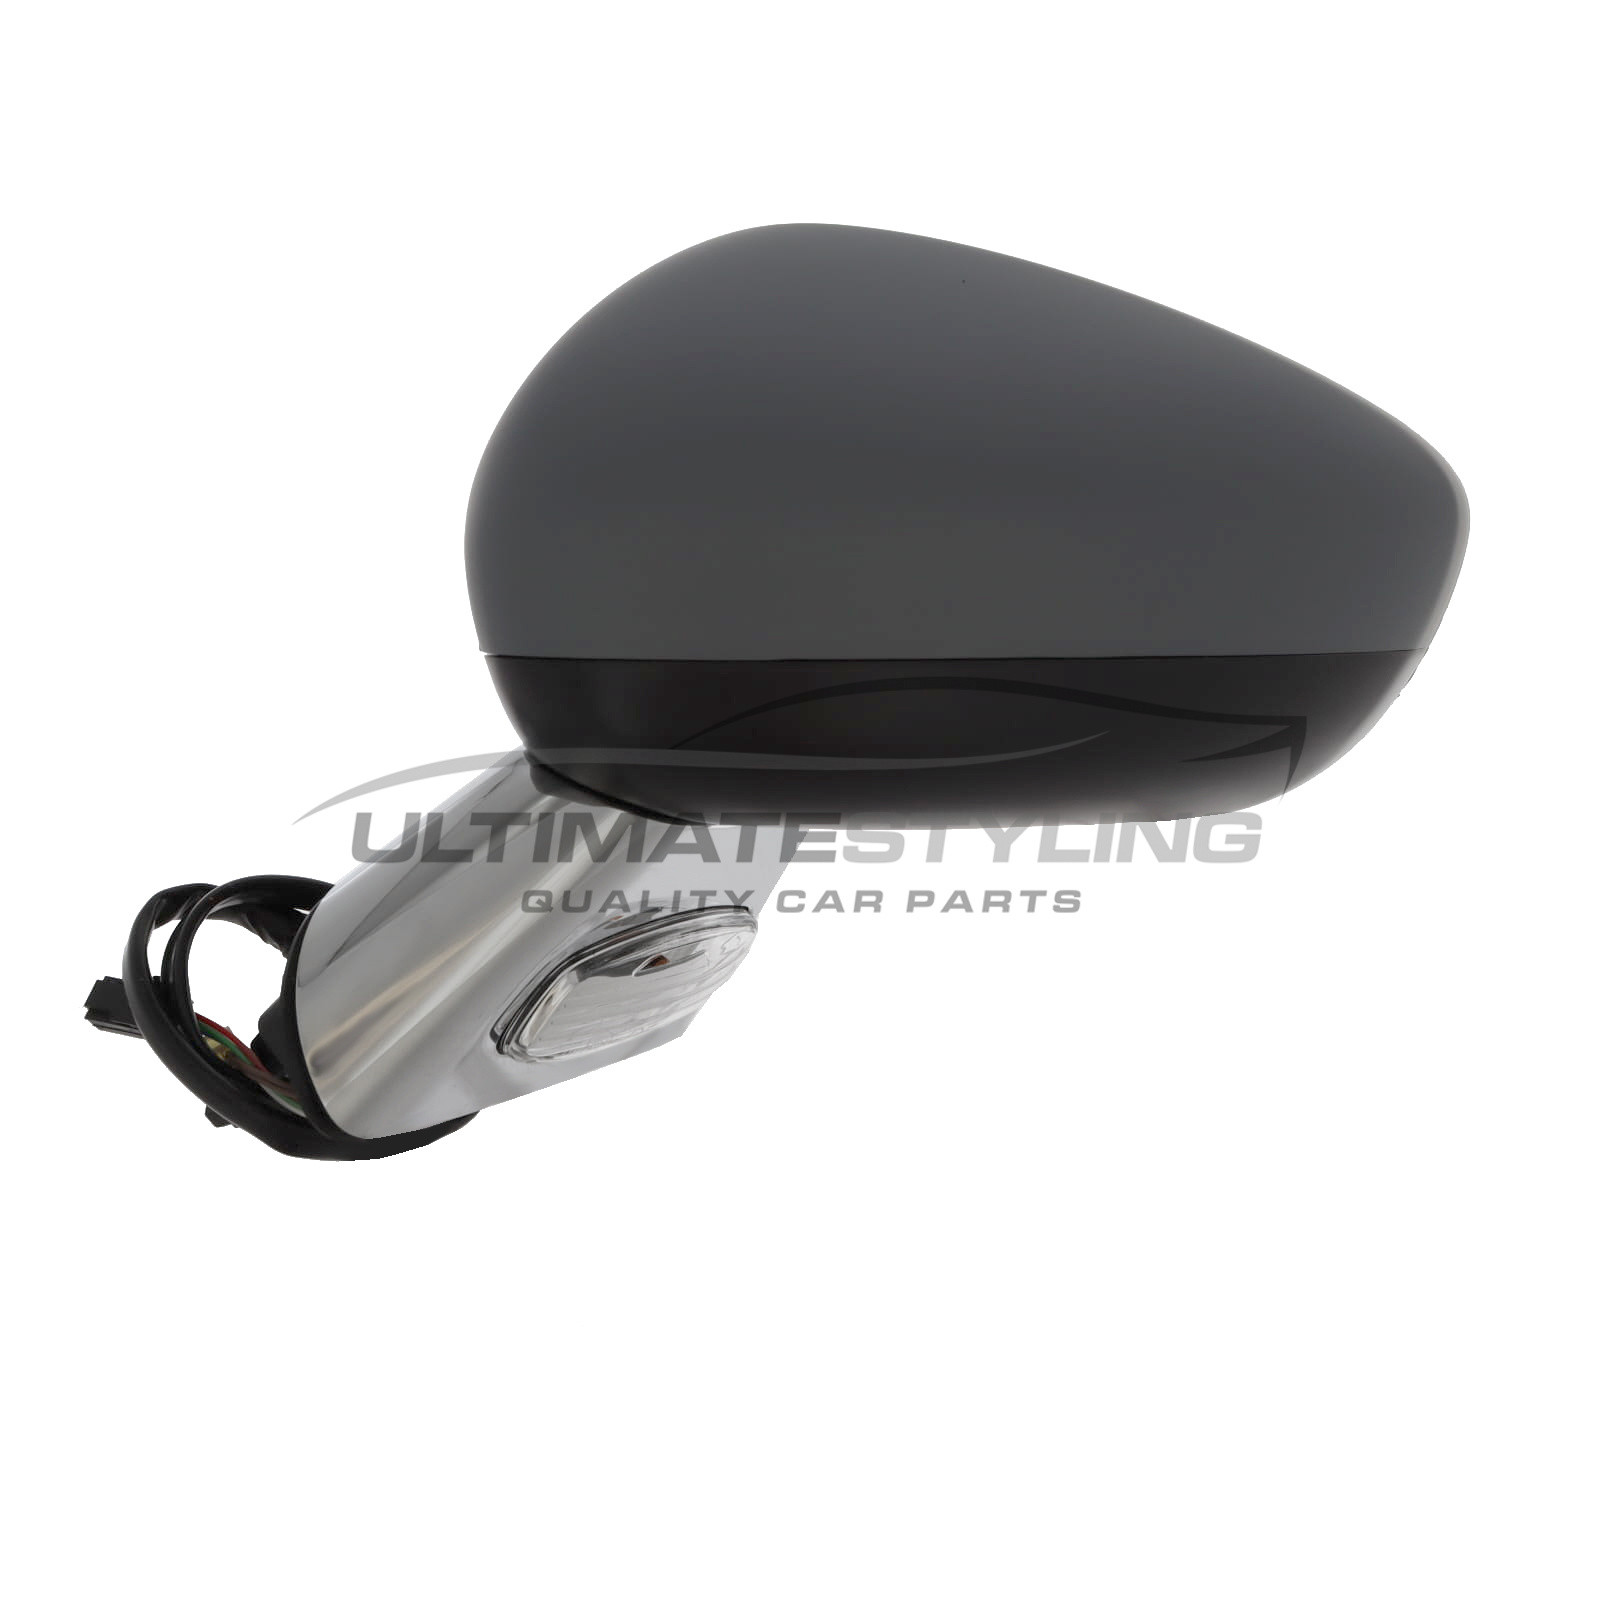 Citroen C3 Wing Mirror / Door Mirror - Passenger Side (LH) - Electric adjustment - Non-Heated Glass - Chrome Arm & Primed Cover